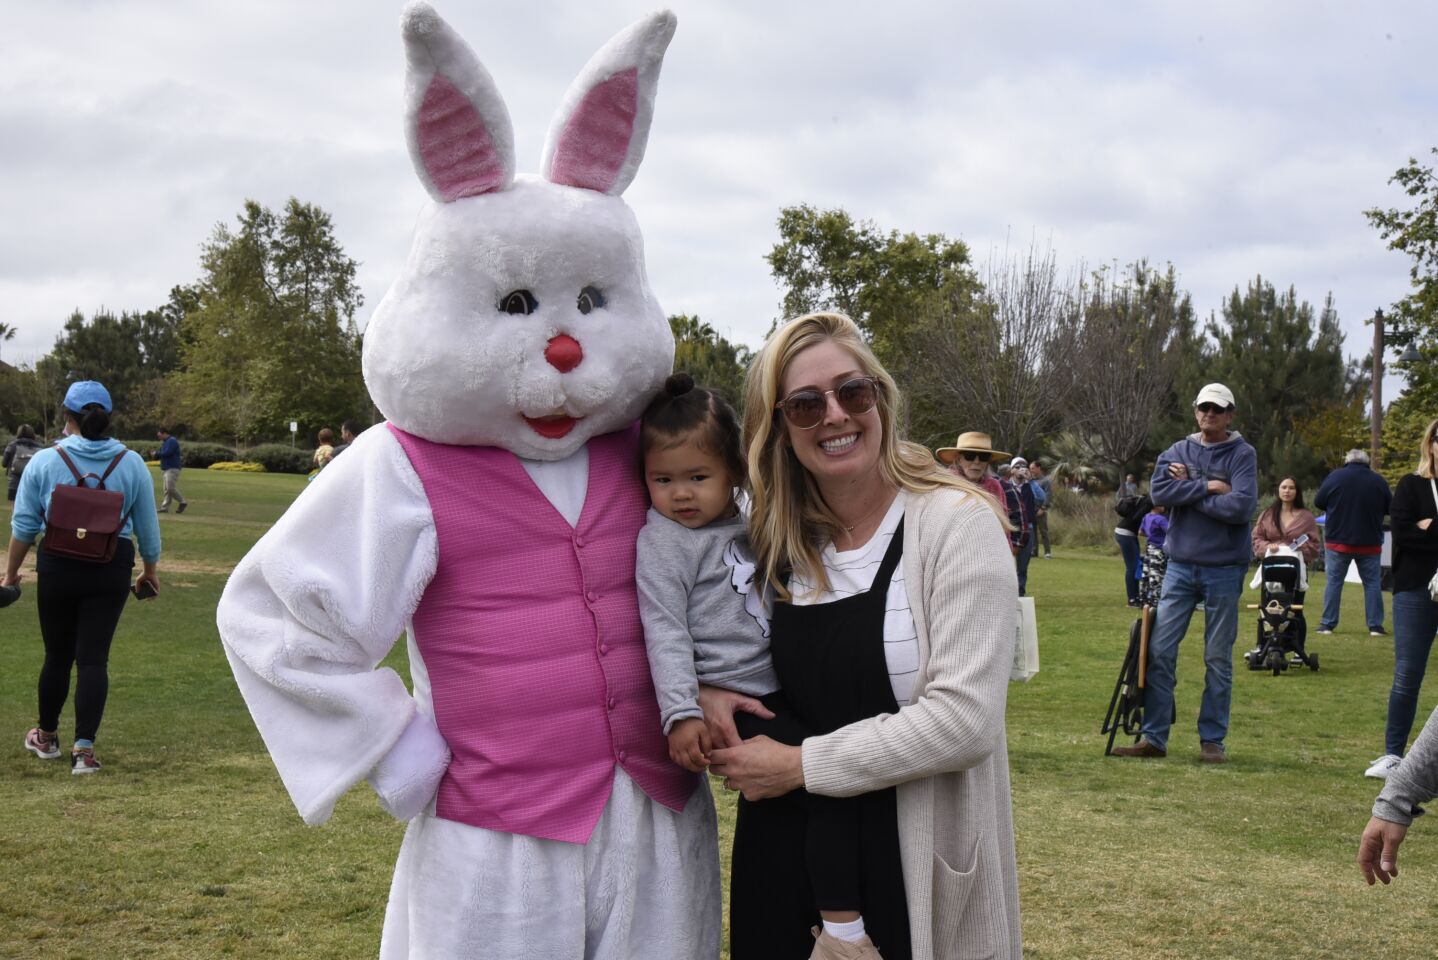 Getting a photo with the Easter Bunny